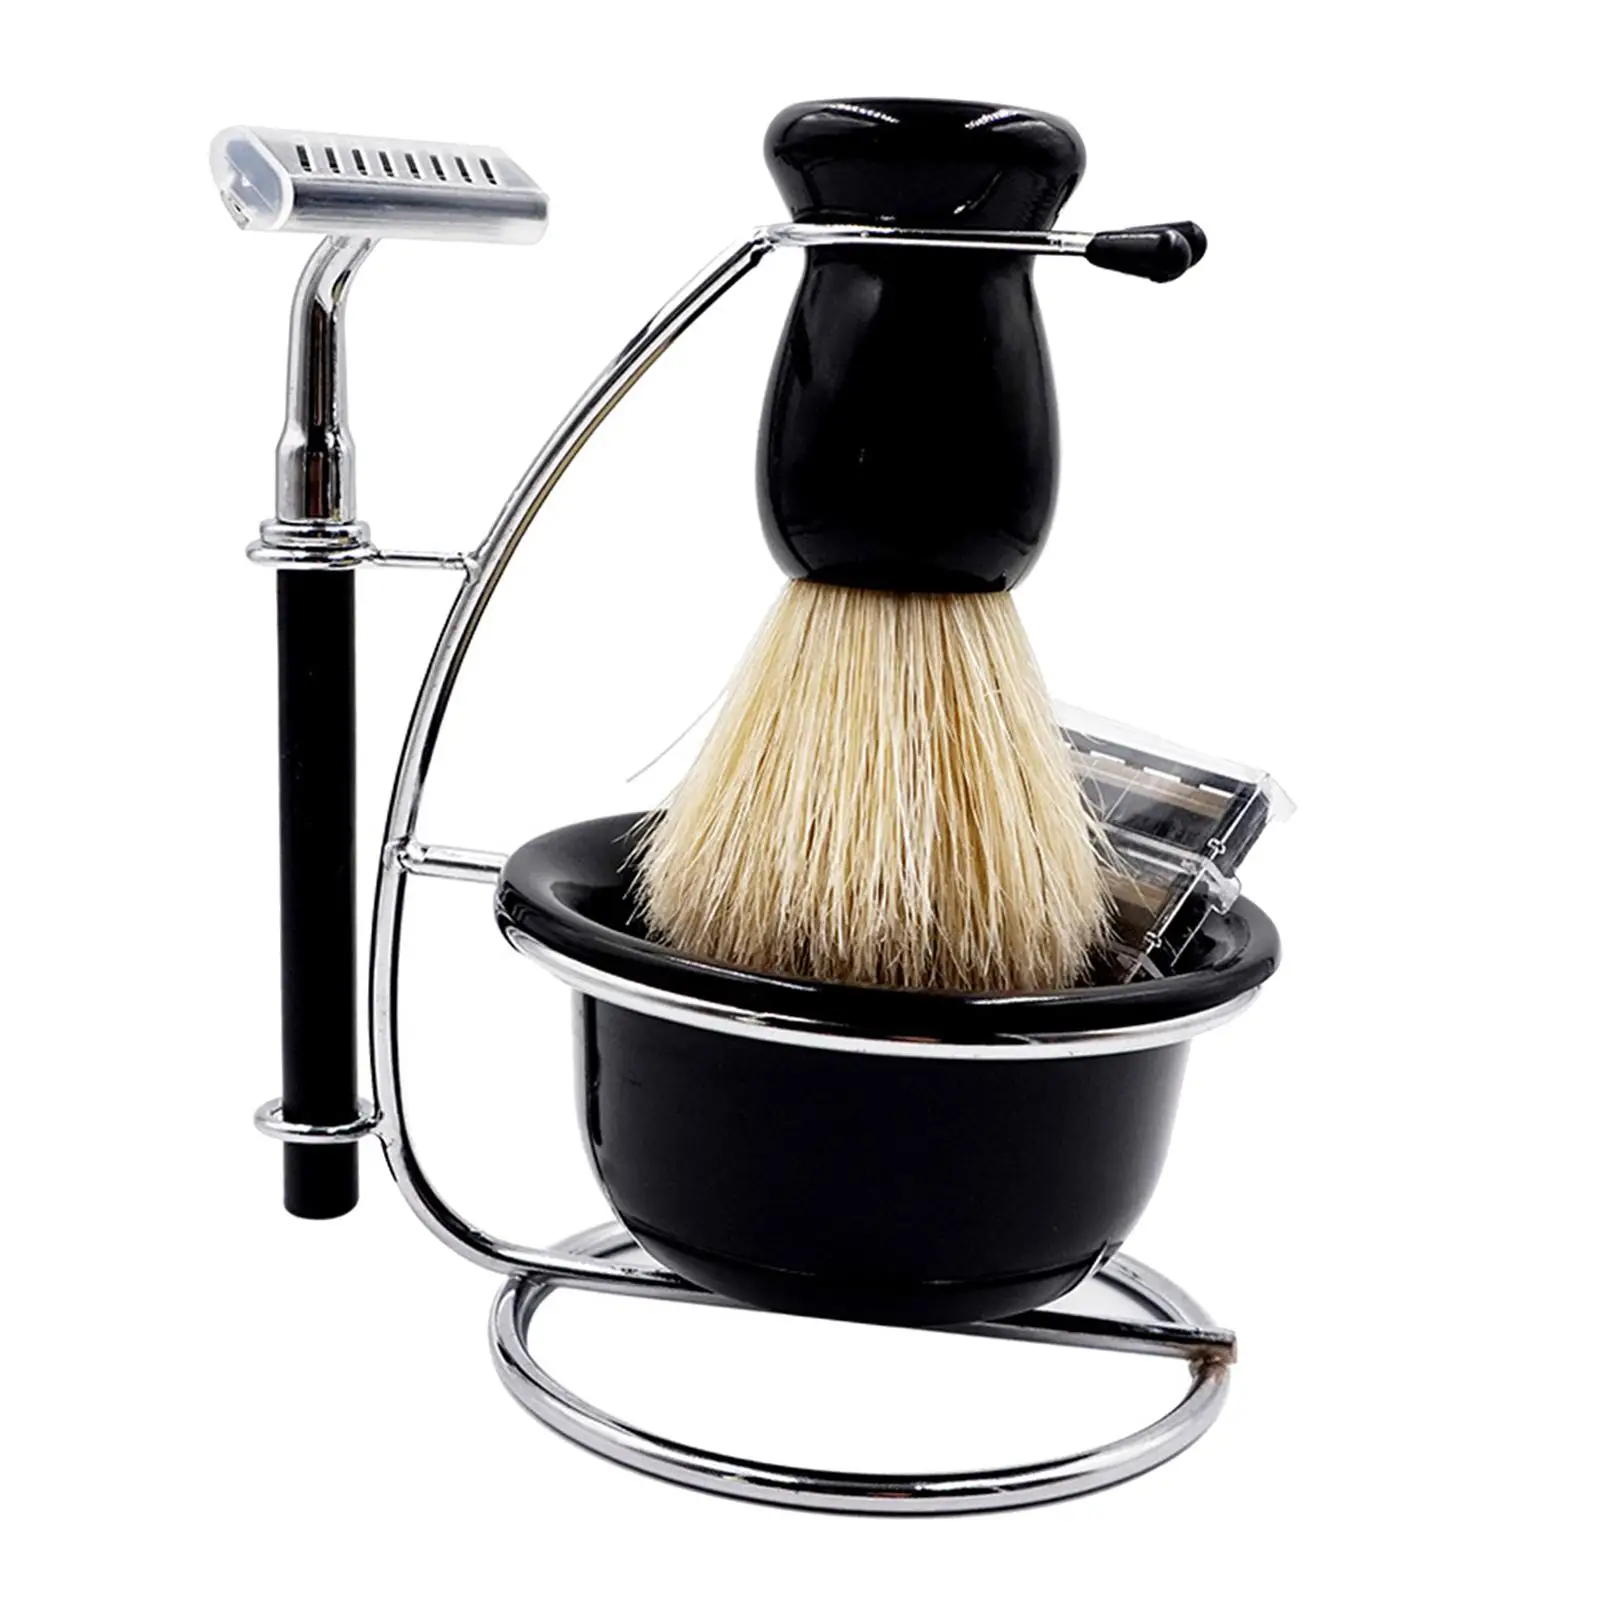 Men Shaving Set Manual Stand Brush Bowl Set Accessory Weighted Bottom Sturdy Stainess Steel Holder Durable Elegant Solid